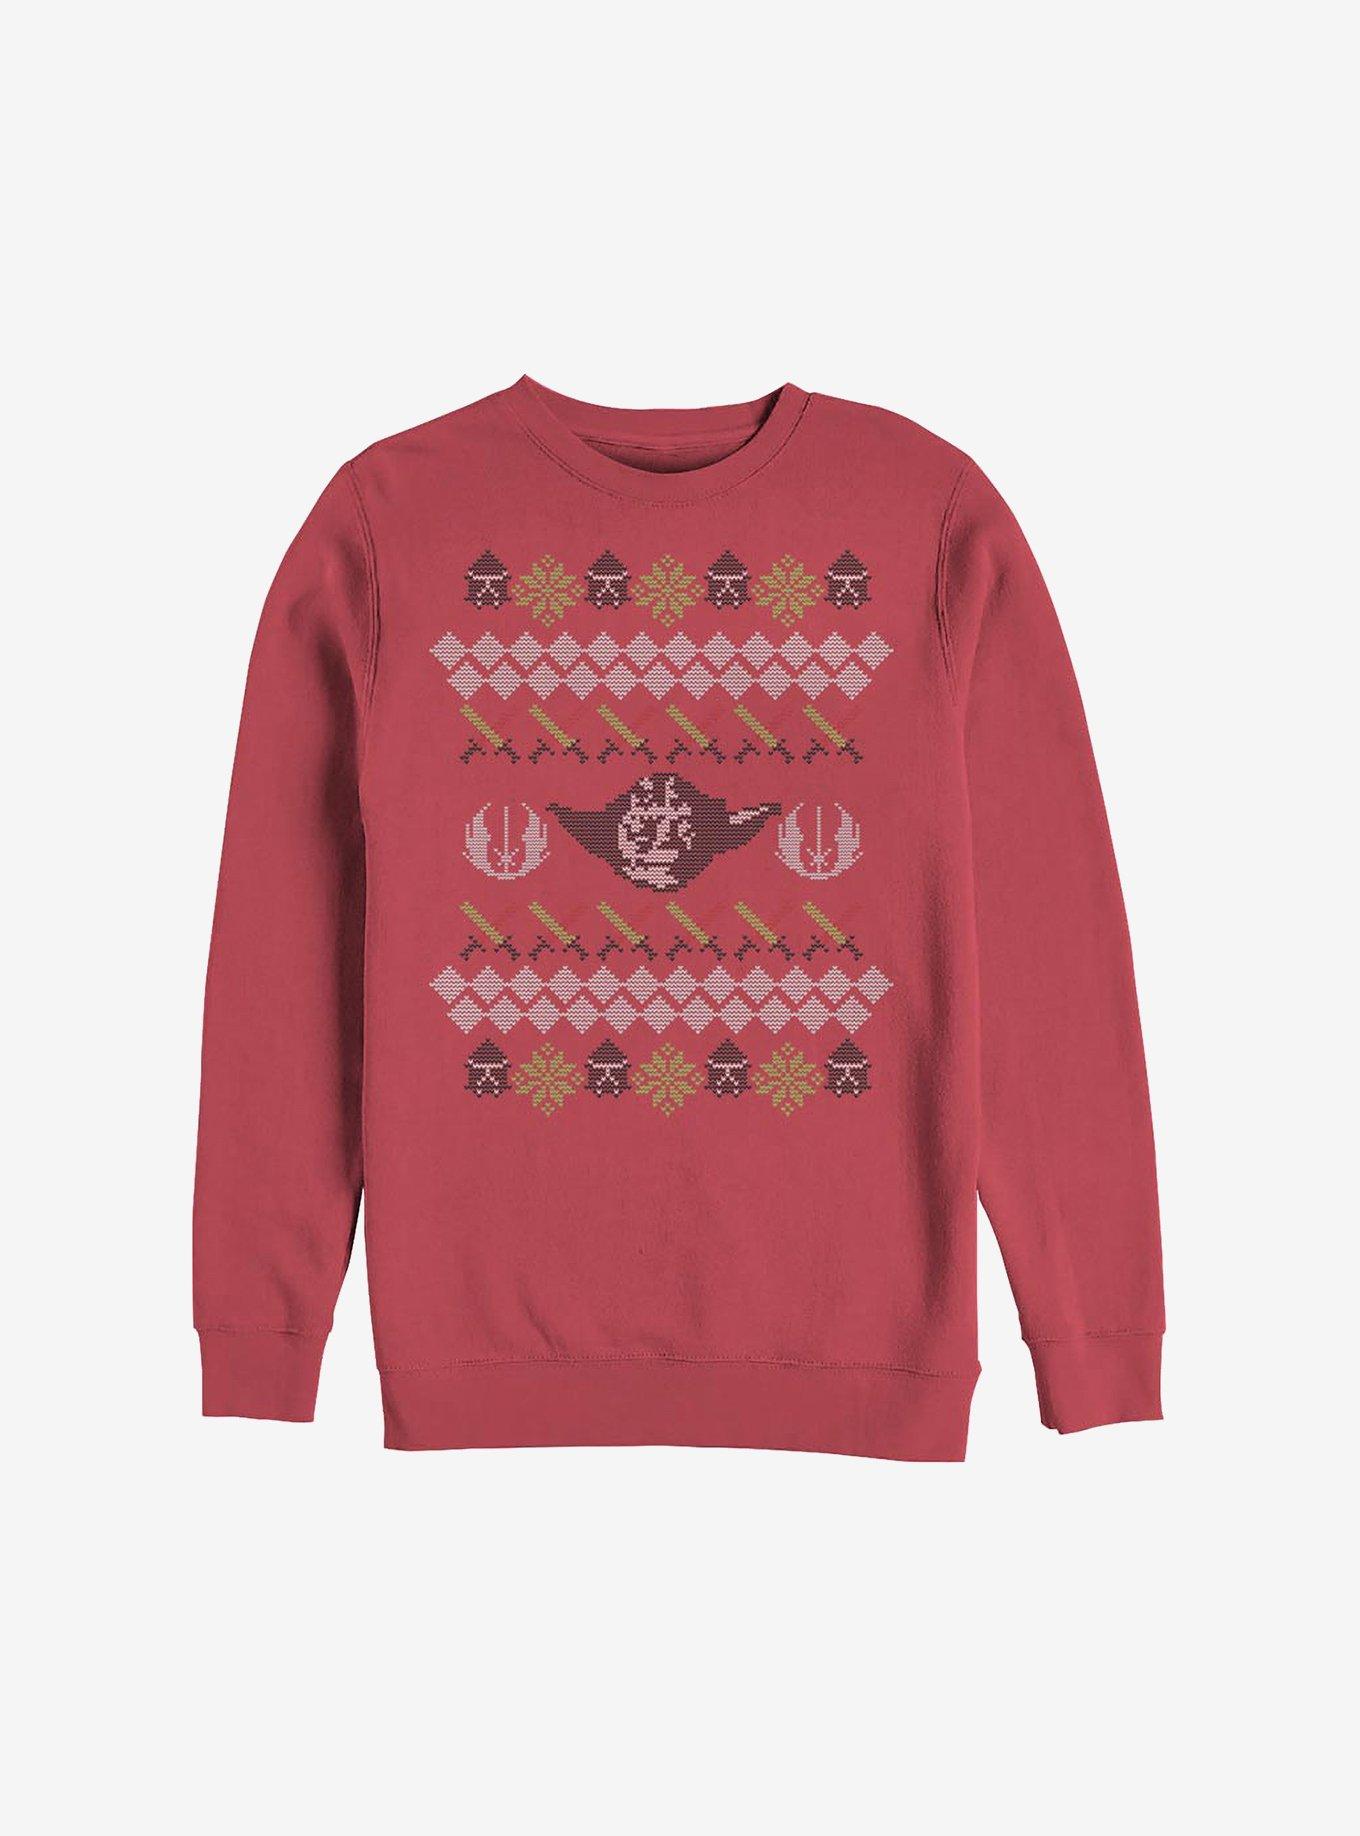 Star Wars Jedi Holiday Ugly Christmas Sweater Sweatshirt, RED, hi-res